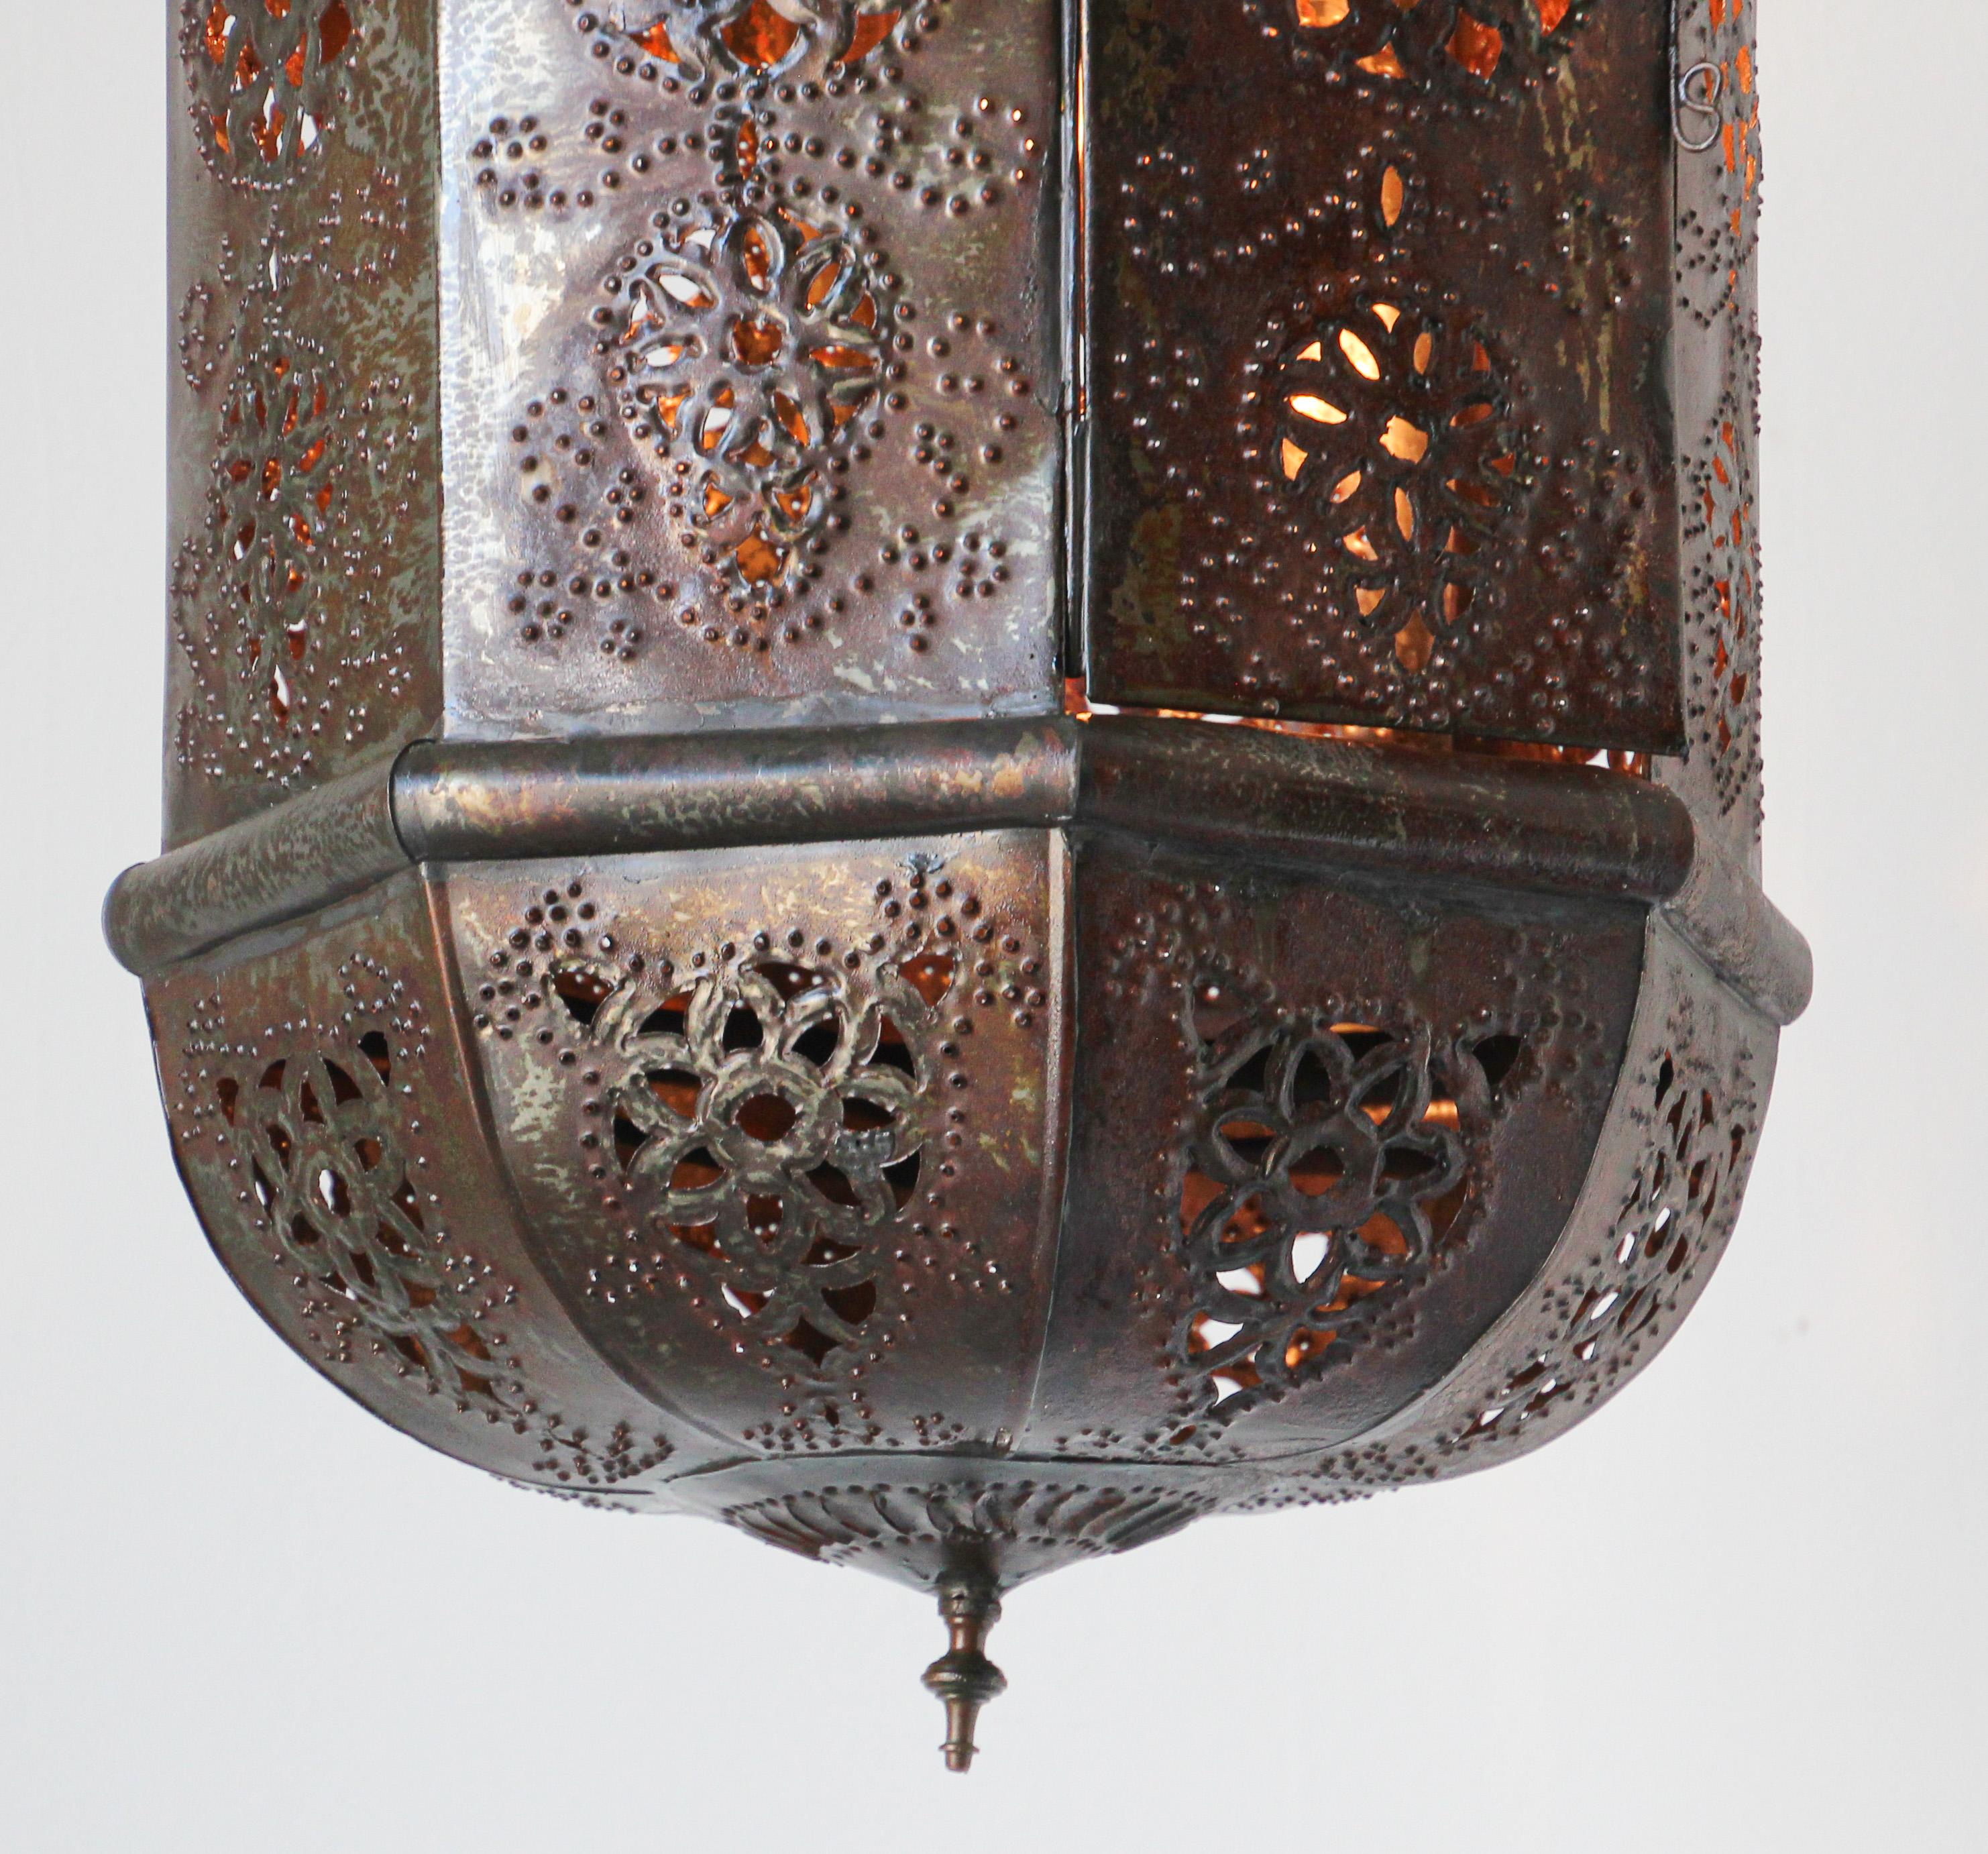 Moroccan handcrafted metal lantern pendant.
Amazing Moorish light fixture hand-pierced with thousands of small holes to diffuse the light through.
Handmade of metal open work with dark bronze rust patina.
Very light metal lantern.
Handcrafted by